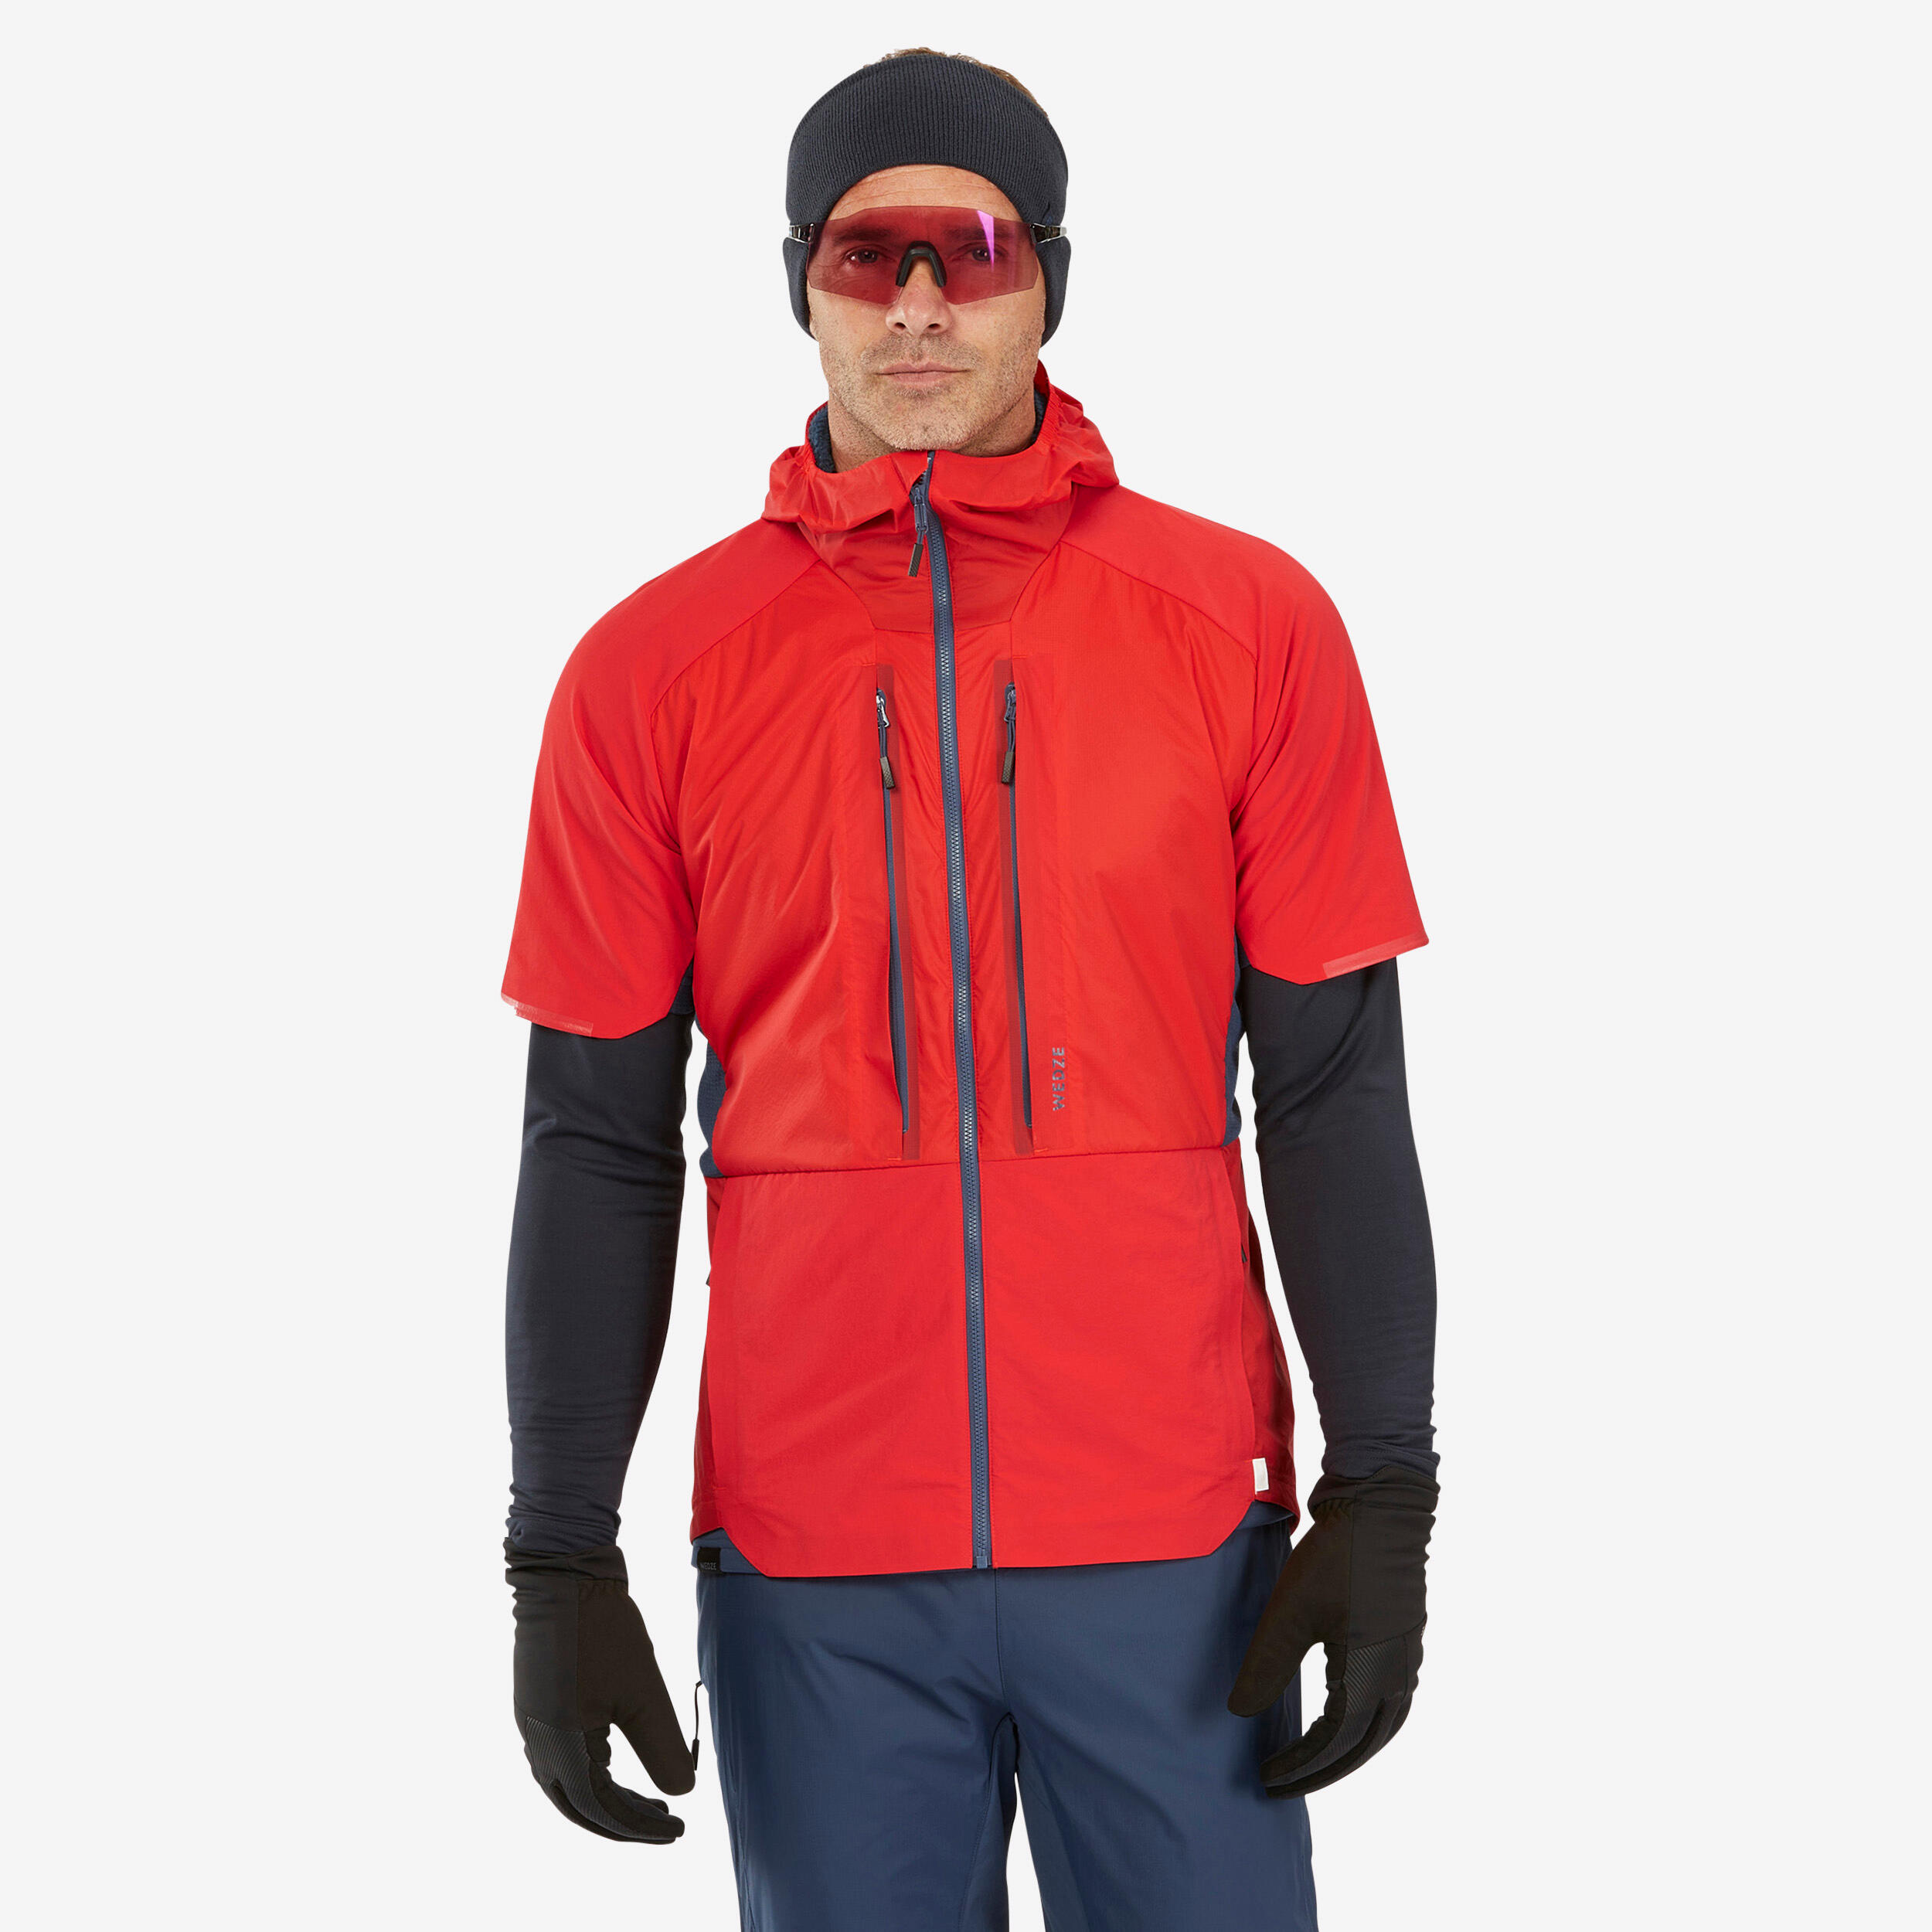 WEDZE MEN'S PACER SHORT-SLEEVED CROSS COUNTRY SKI JACKET - RED AND NAVY BLUE